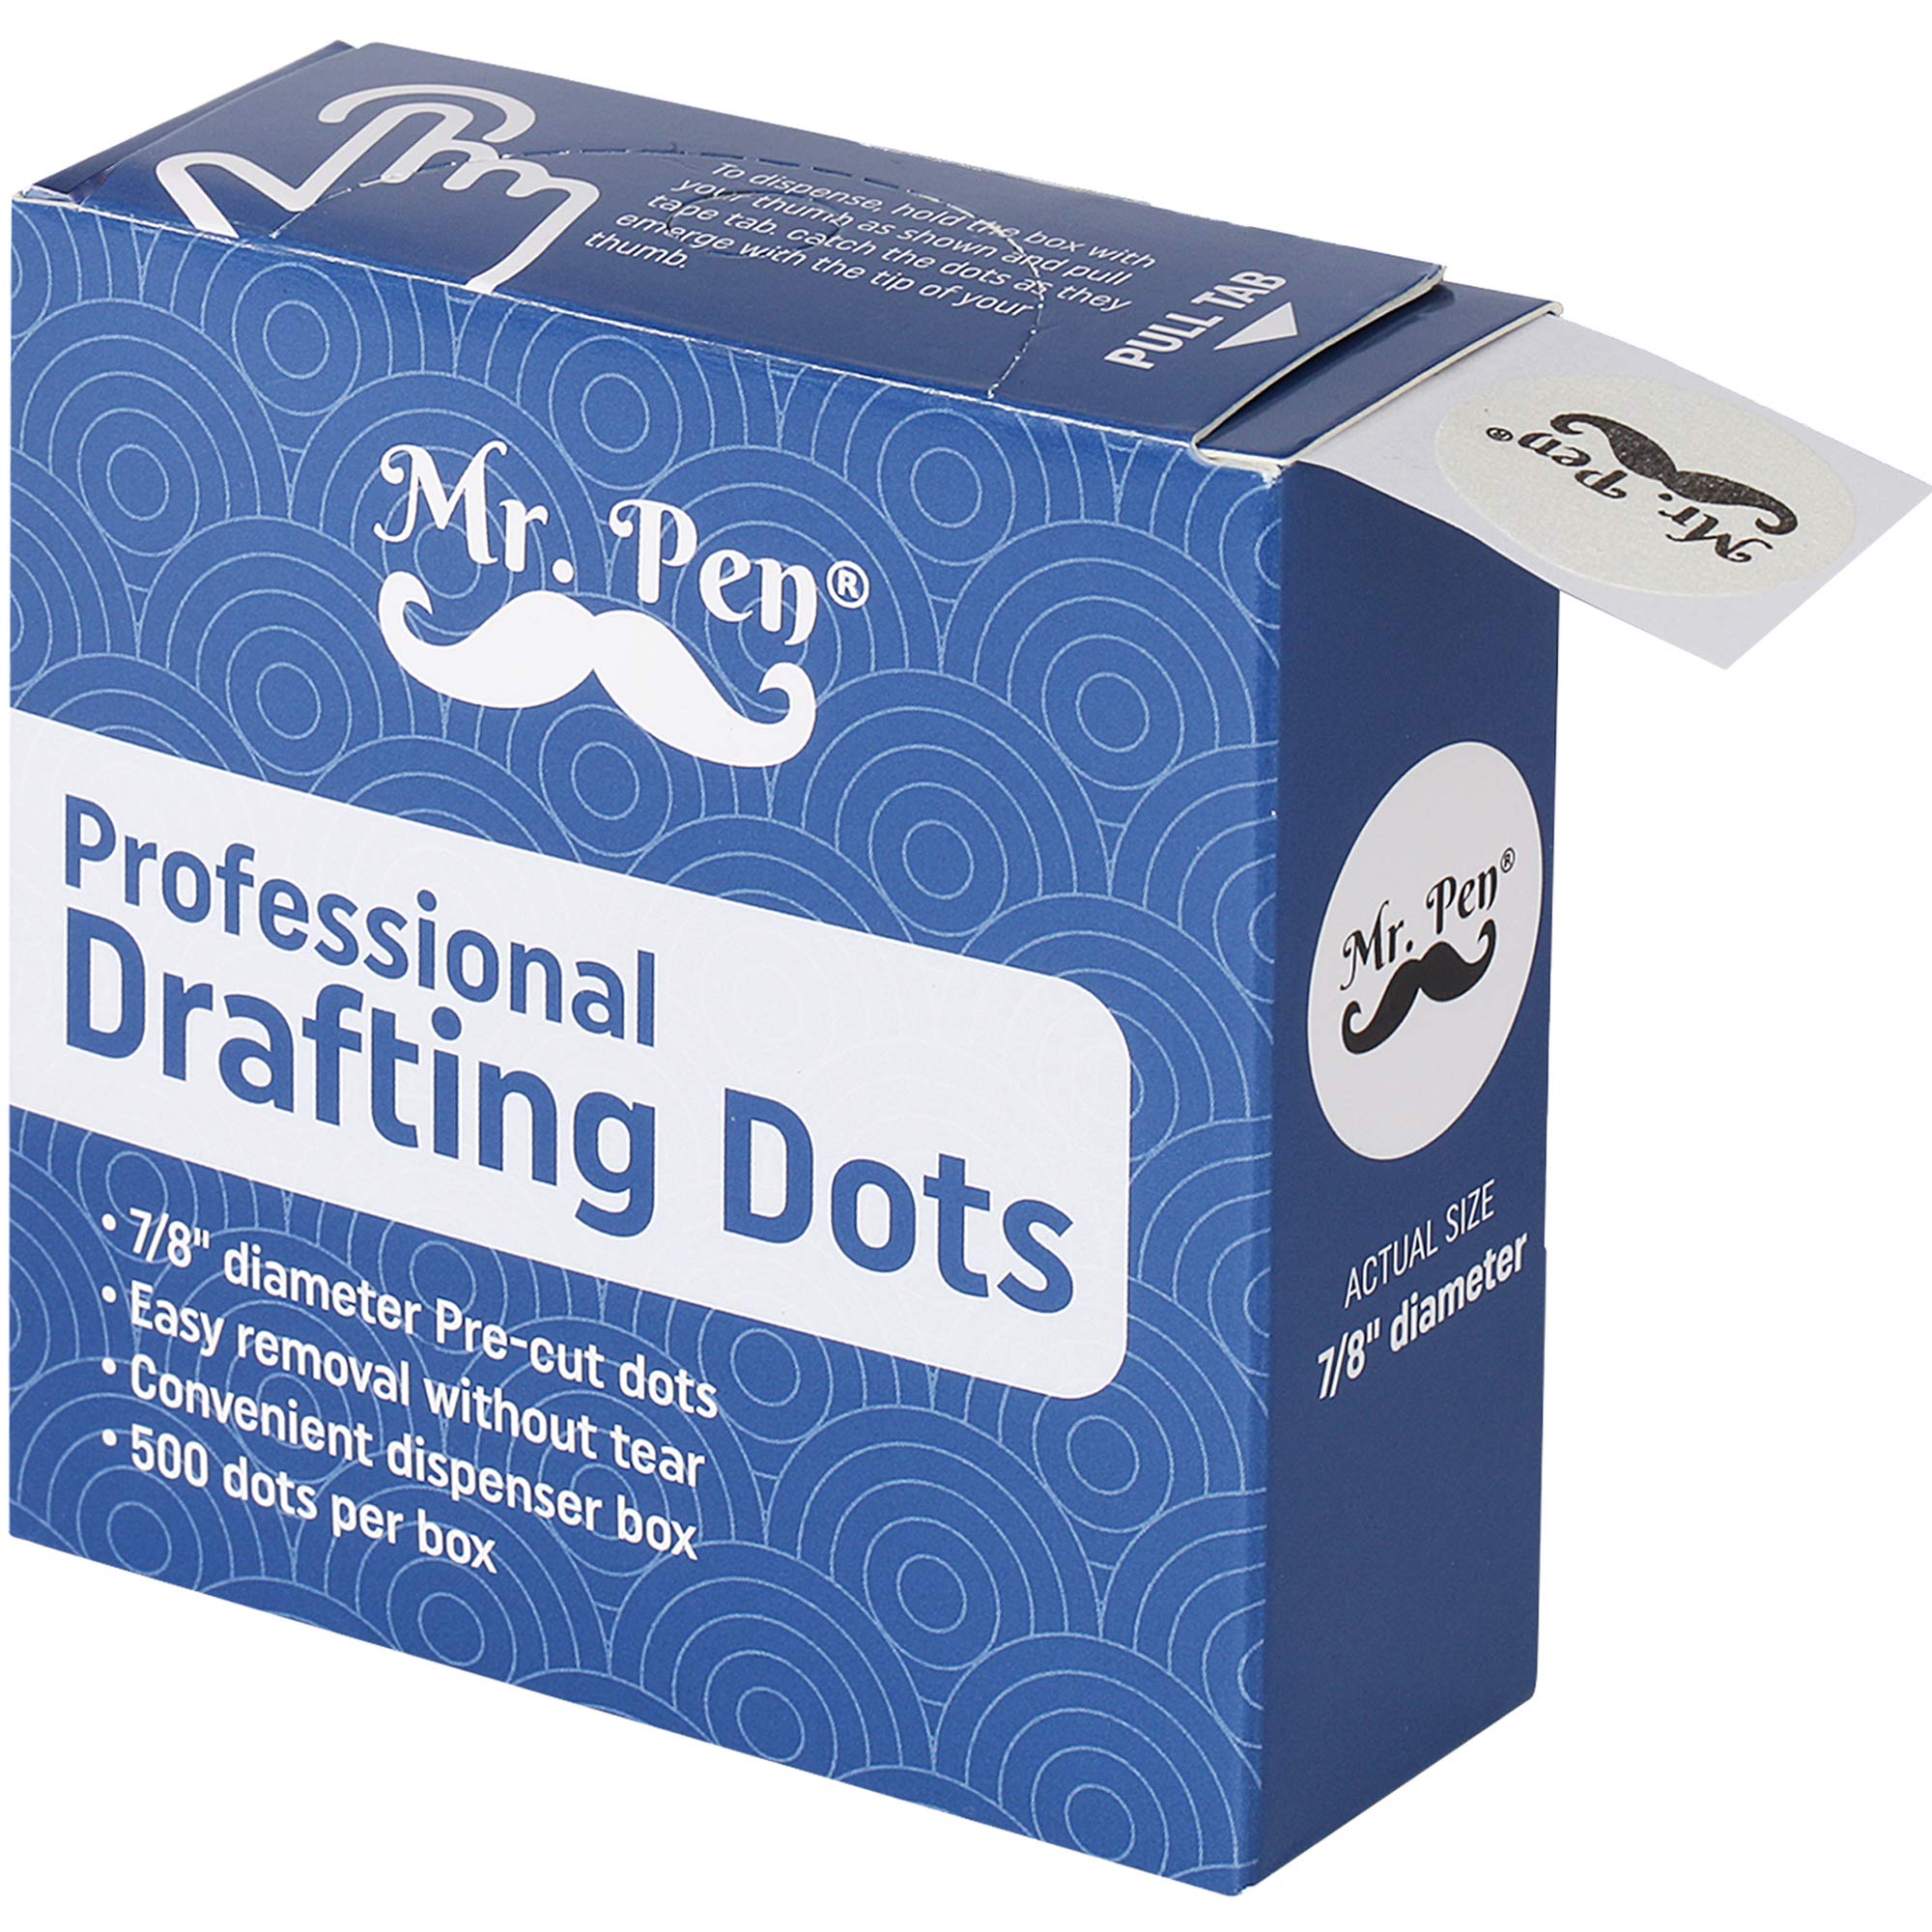 Book Cover Mr. Pen- Professional Drafting Dots, 500 Pieces Drafting Dots, Art Tape, Tape Dots, Artist Masking Tape, Drafting Supplies, Architectural Dots Tape, Stationary Tape, Tape for Art and Drawing Paper